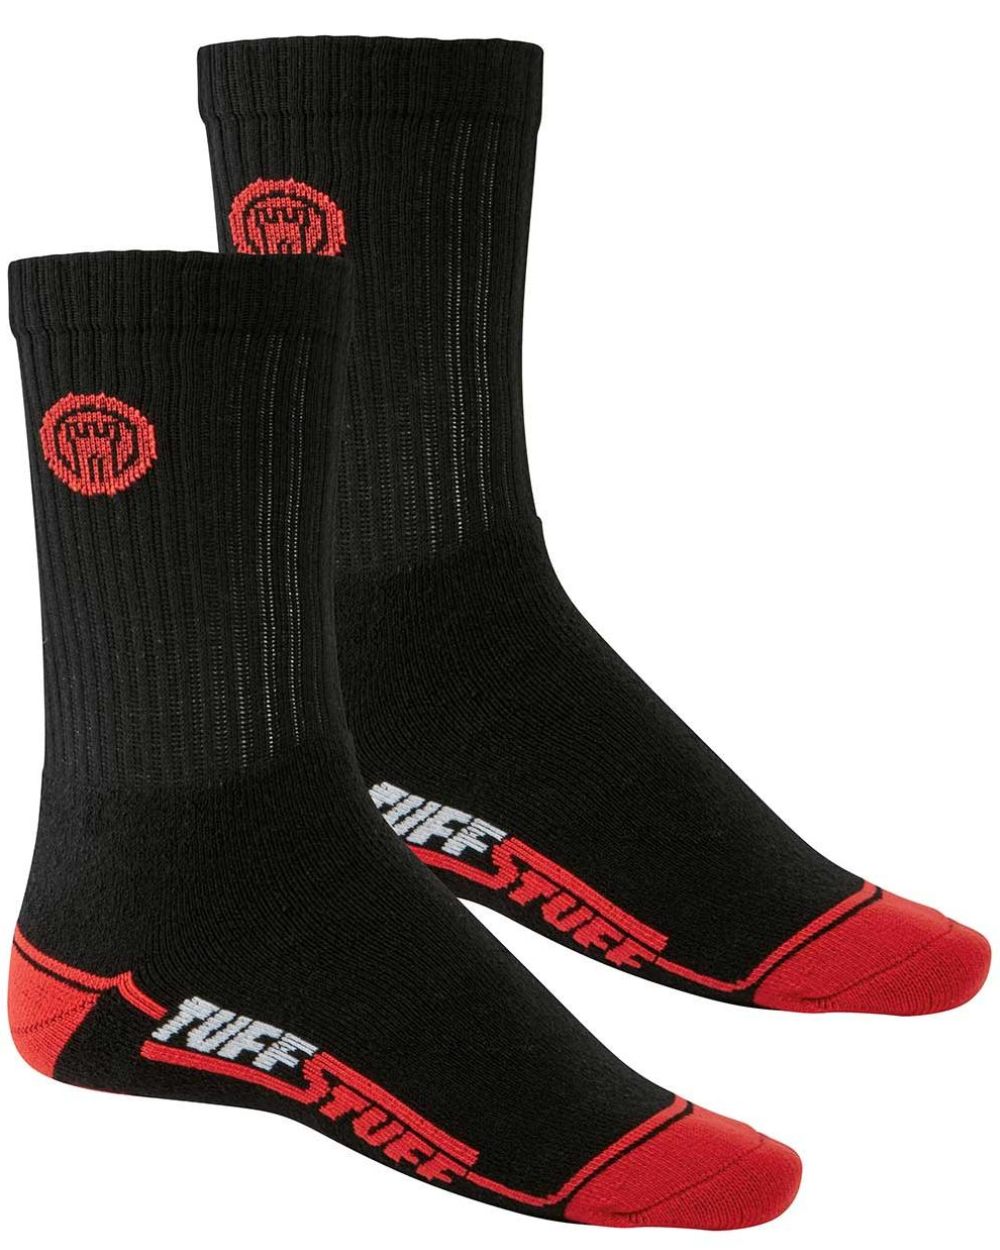 Black Red Coloured TuffStuff Extreme Socks On A White Background